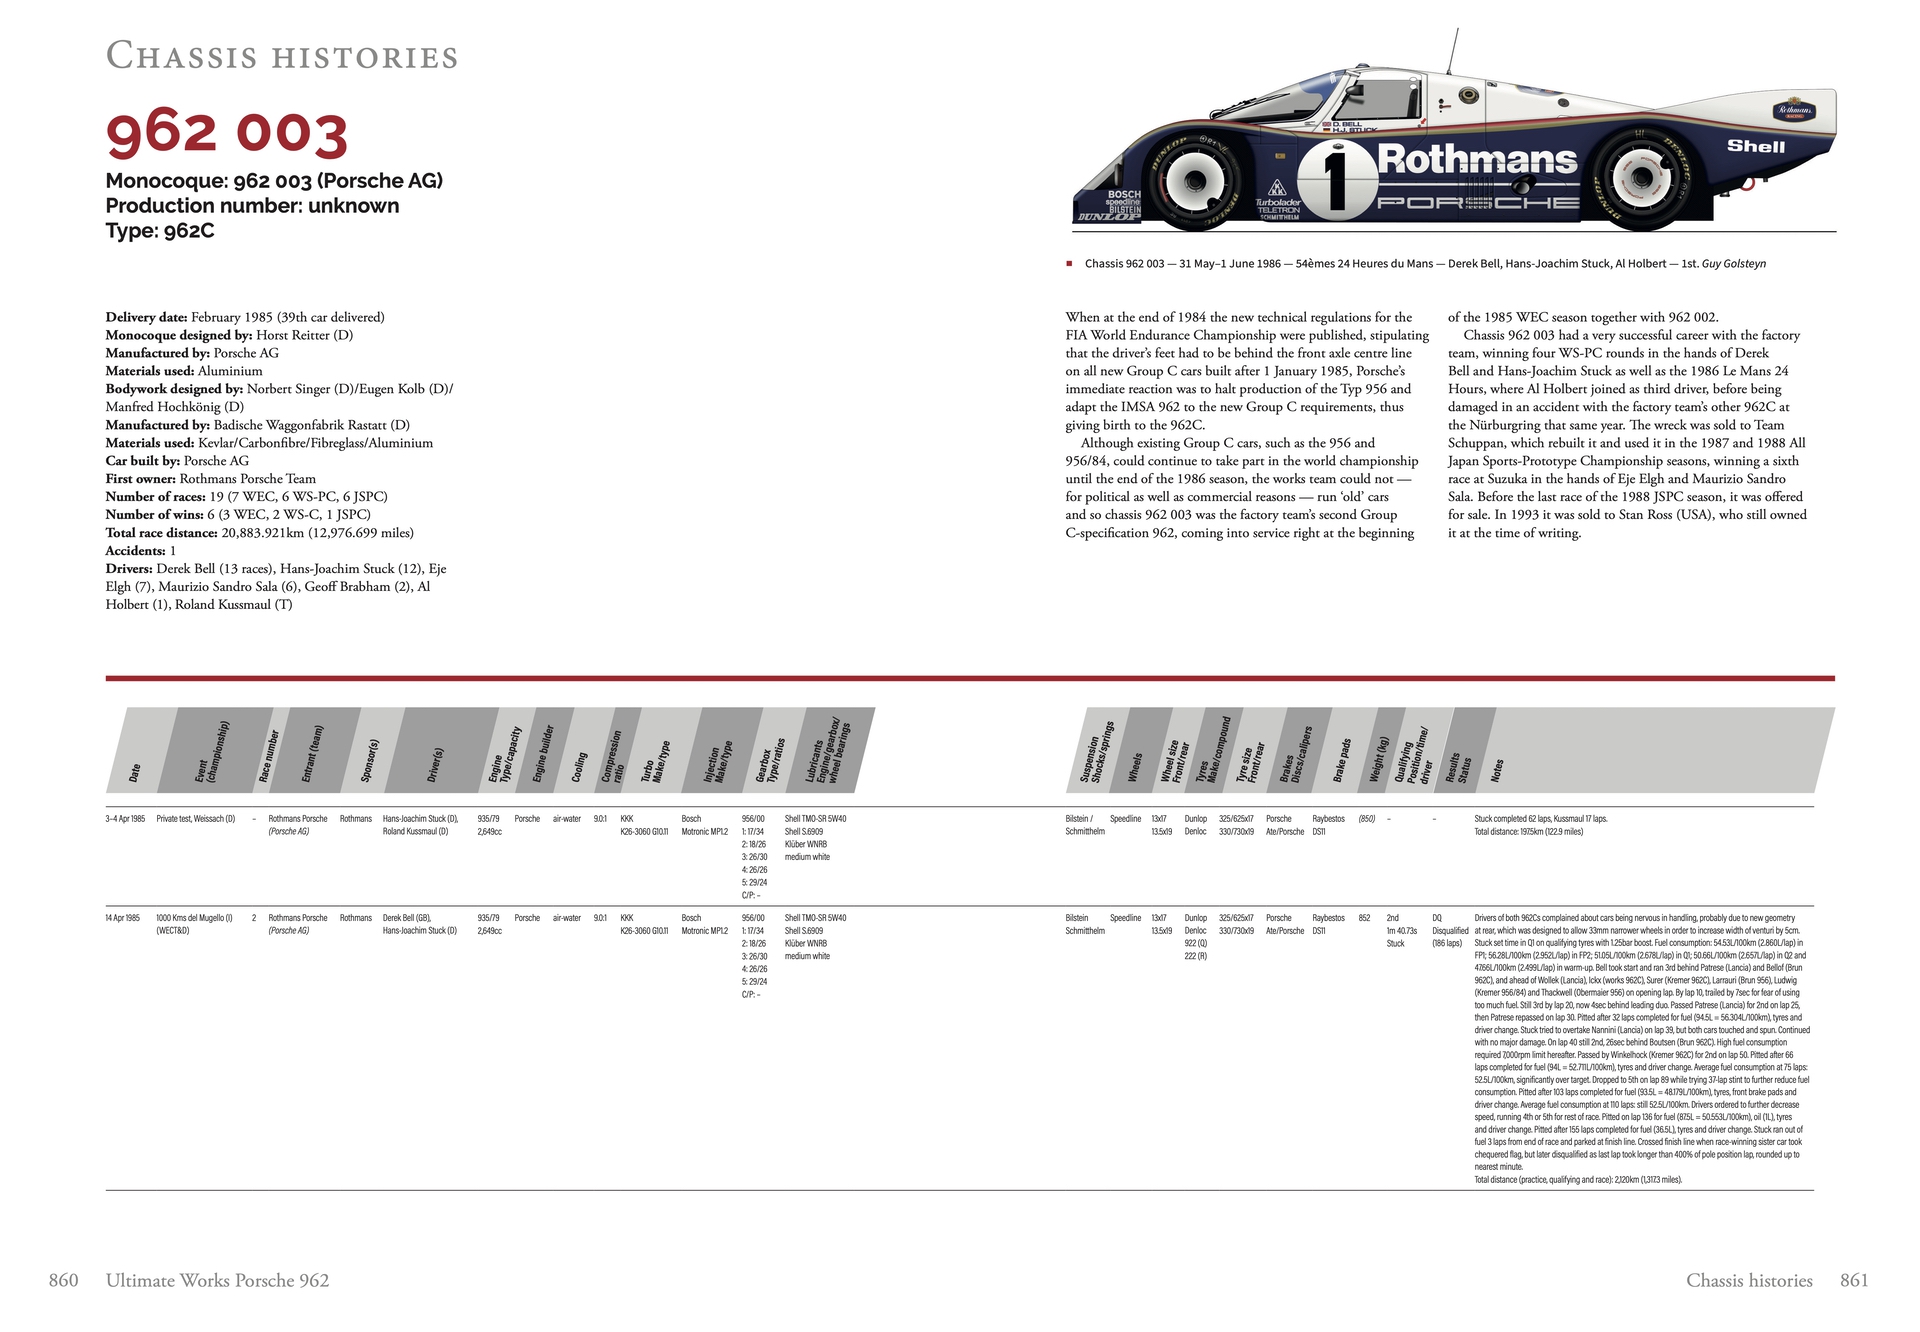 Page from Ultimate Works Porsche 962 - The Definitive History featuring Chassis 003